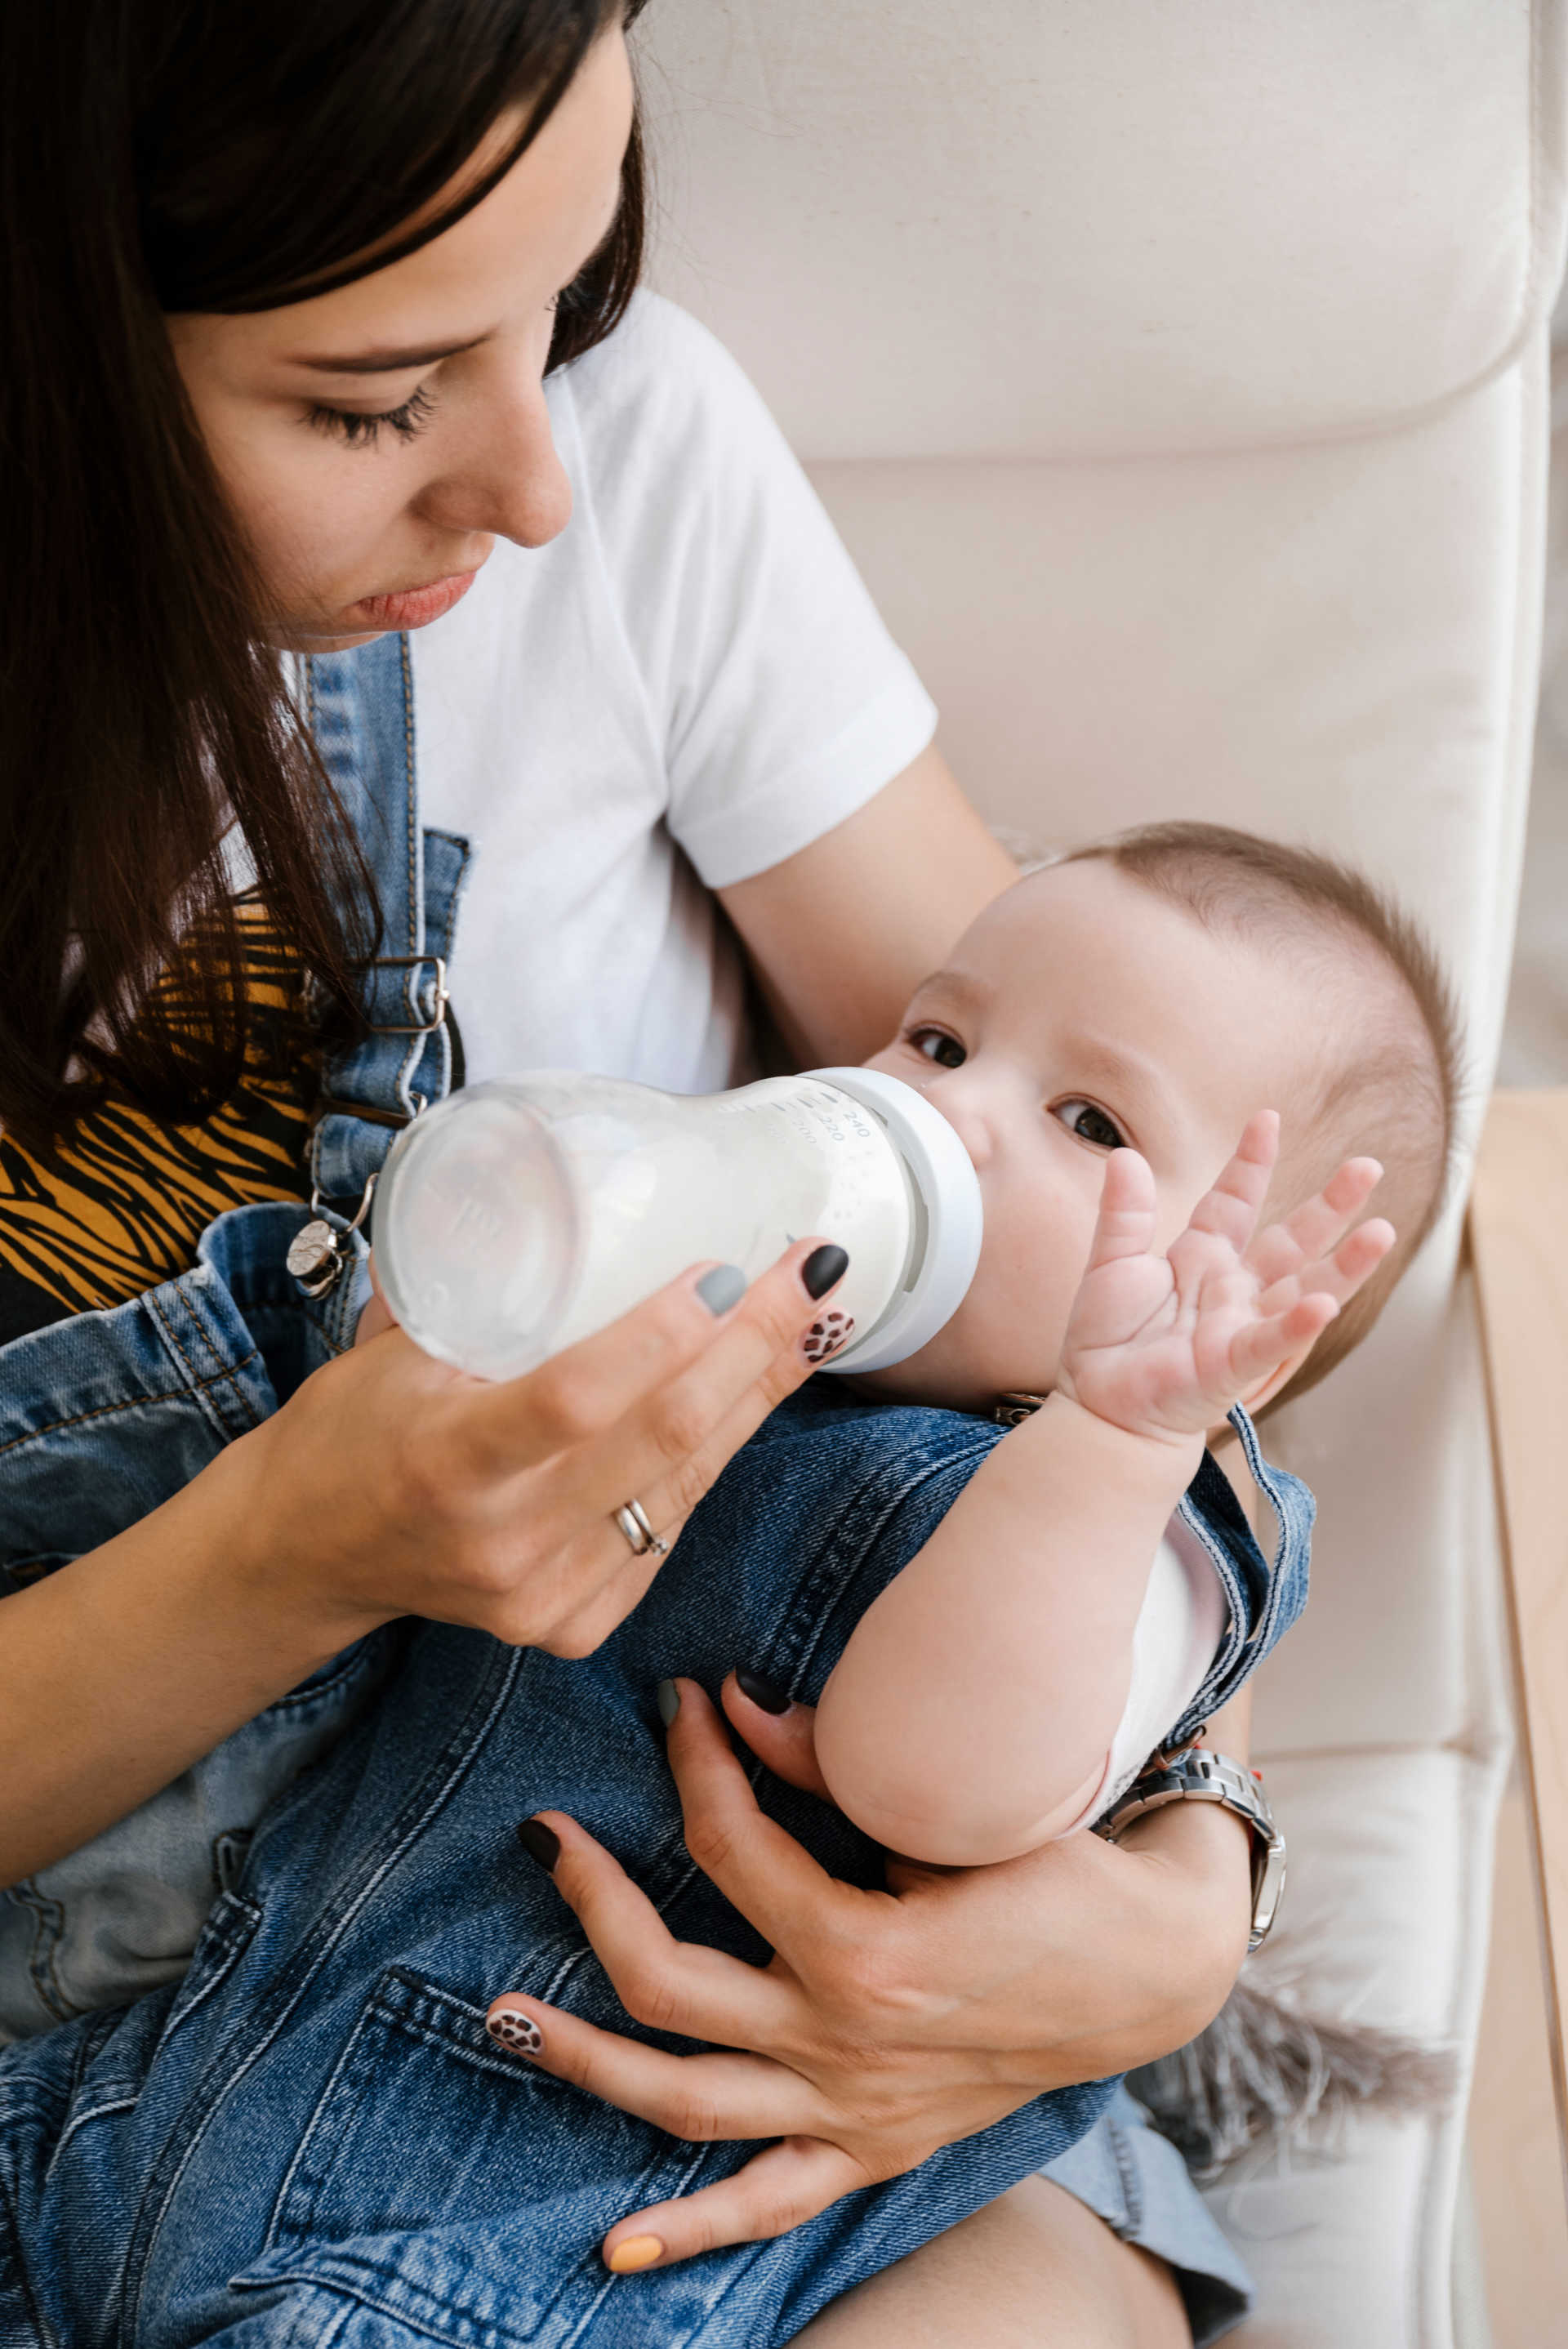 How to Choose the Best Bottle for Your Breastfed Baby - Nurturing Milk